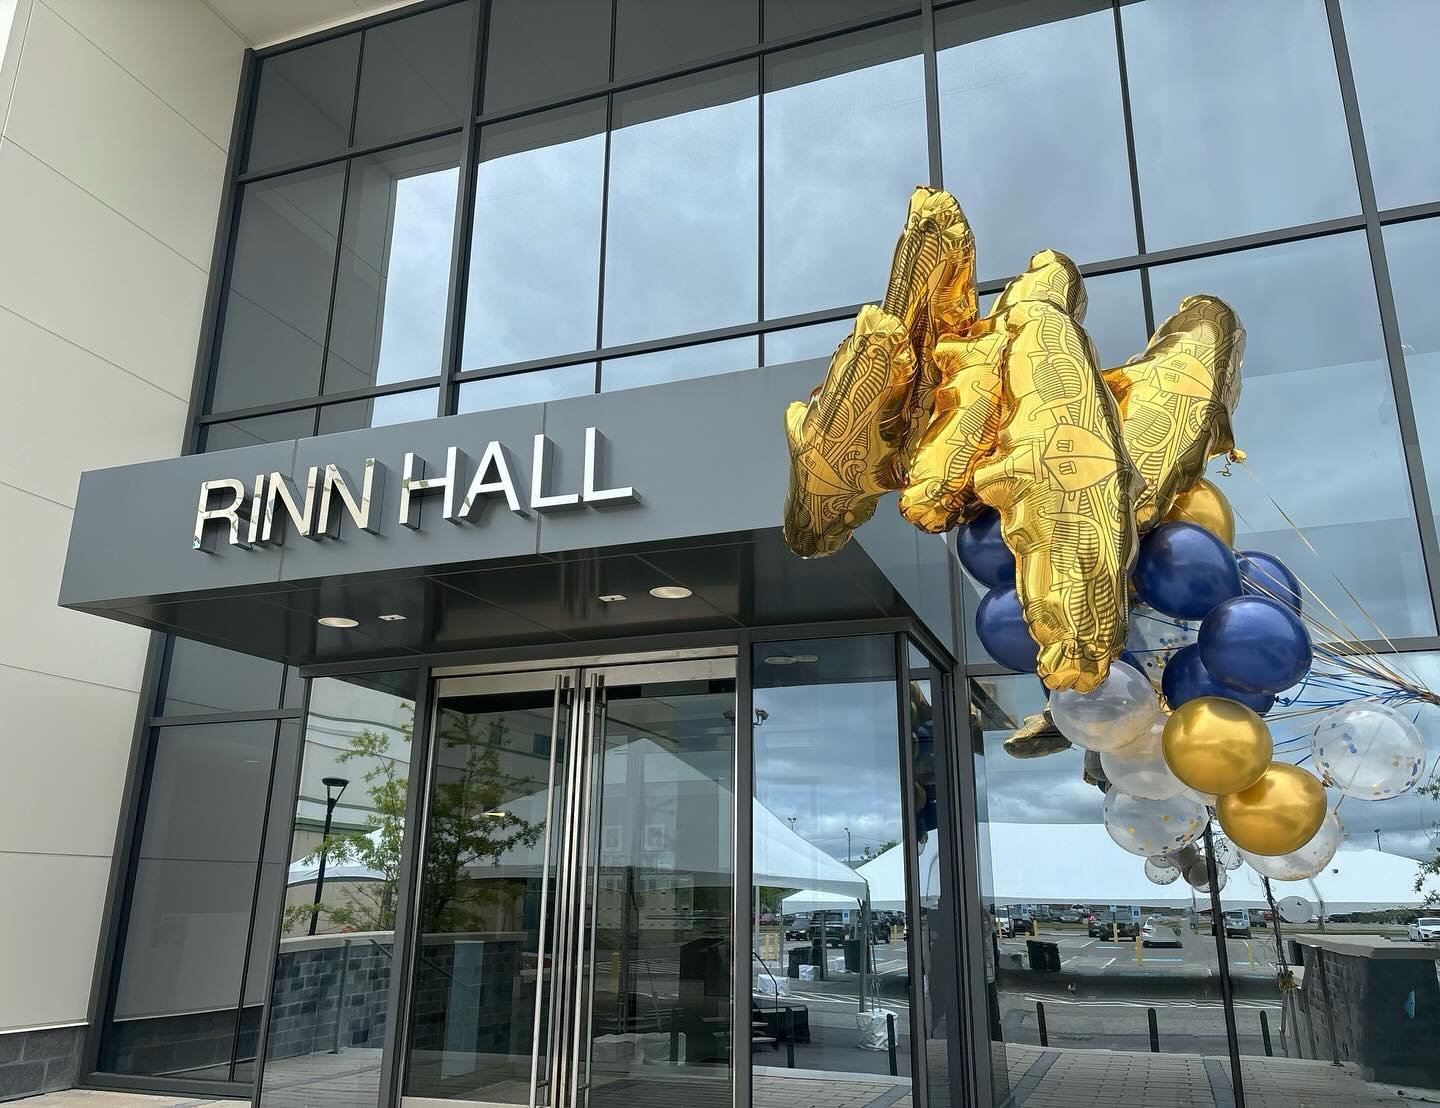 Dream come true!

When I first started thinking about how to bring SWO balloons to life, having balloons at ceremonies seemed like a far off dream.

To be able to provide this service for the Mariner Skills Training Center, Atlantic dedication of Rin